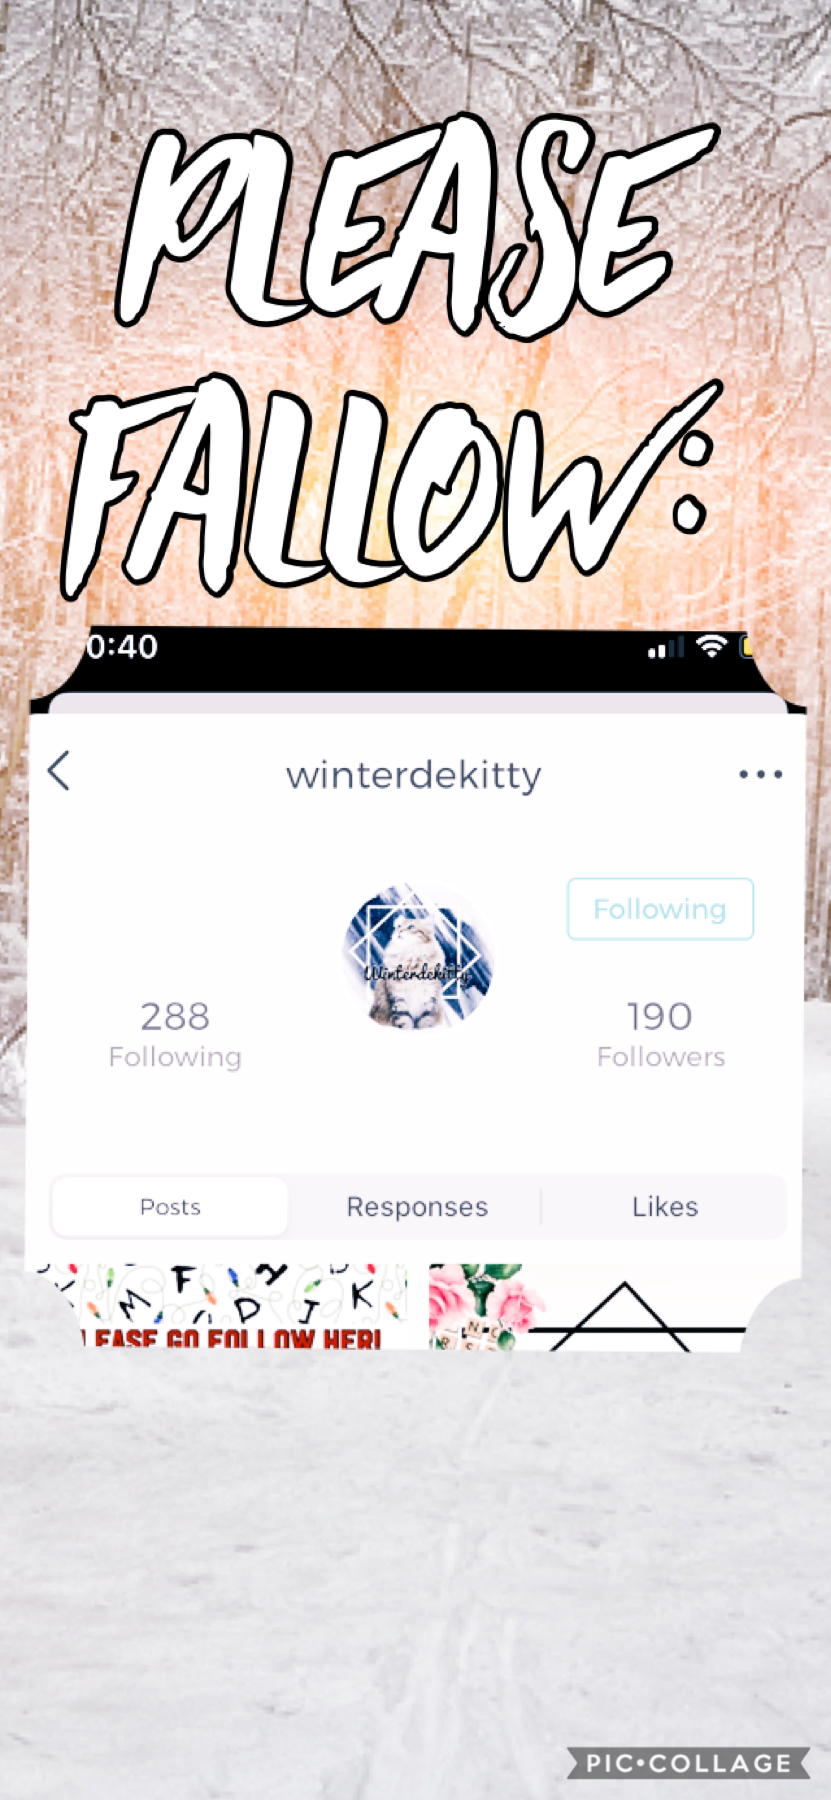 Please fallow her! She is really talented, and has some breath less posts, check out her account! 

ʕ￫ᴥ￩ʔ